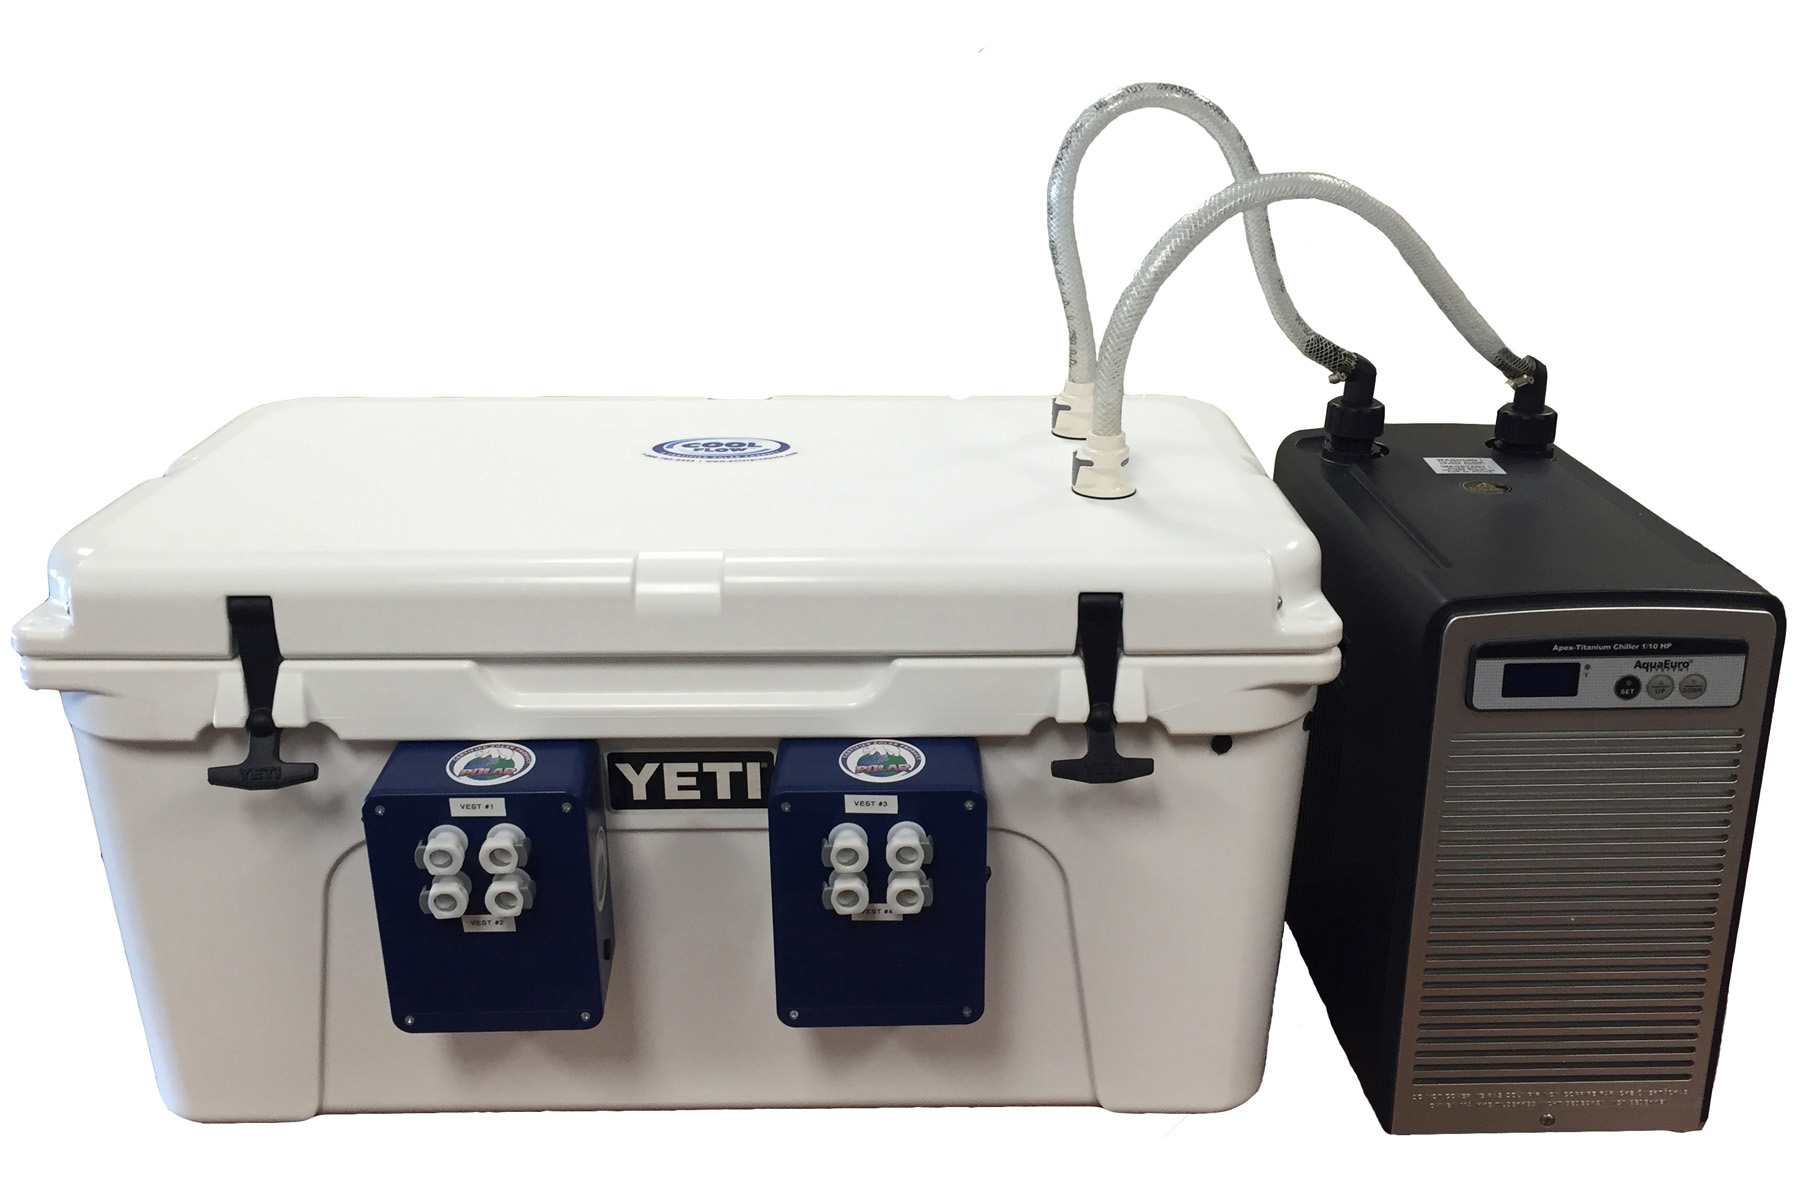 White Yeti cooler circulating cold water system with water chiller next to it